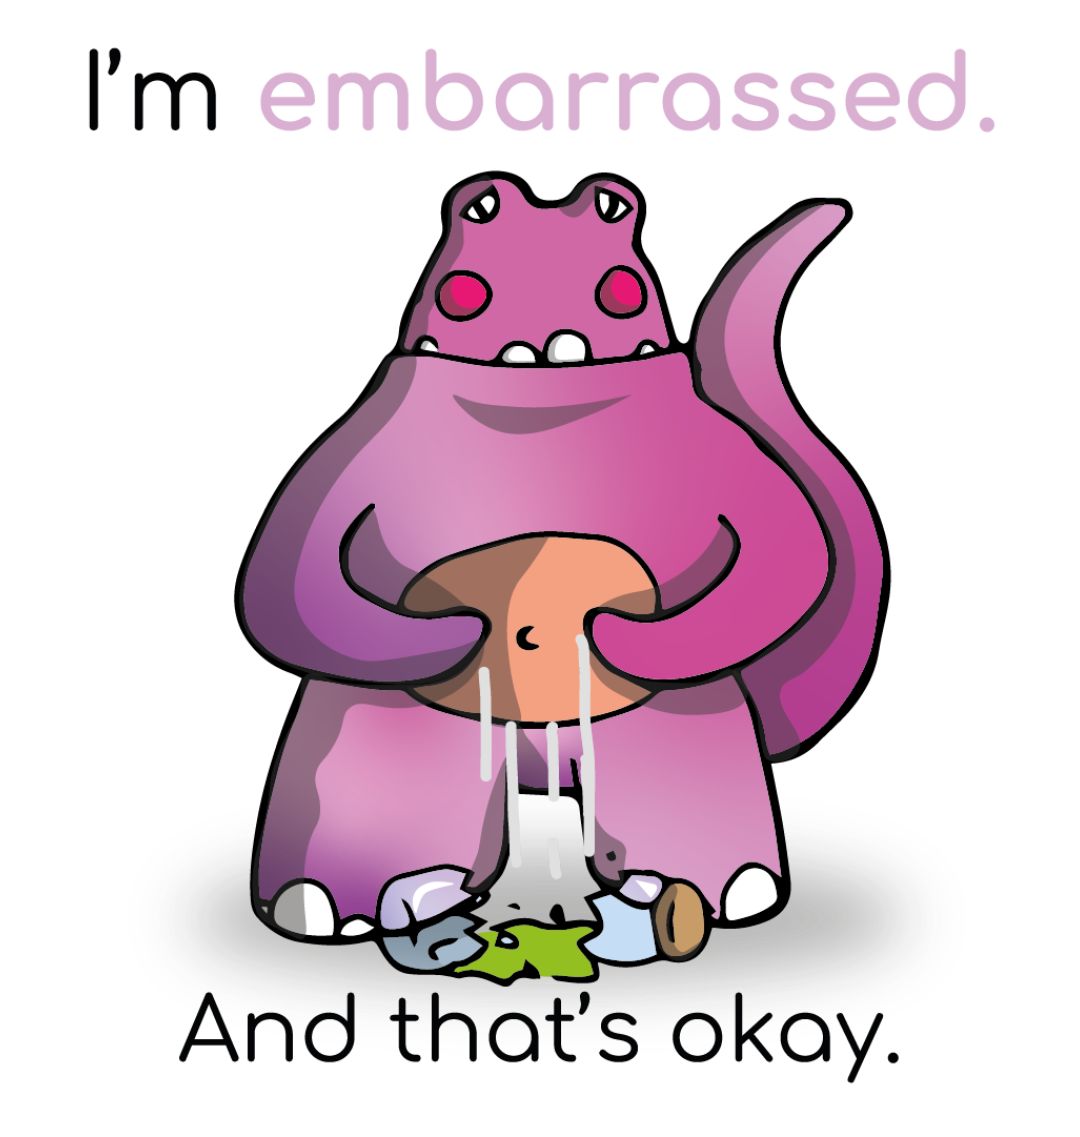 "I'm embarrassed. And that's okay!" Mental Health Sticker